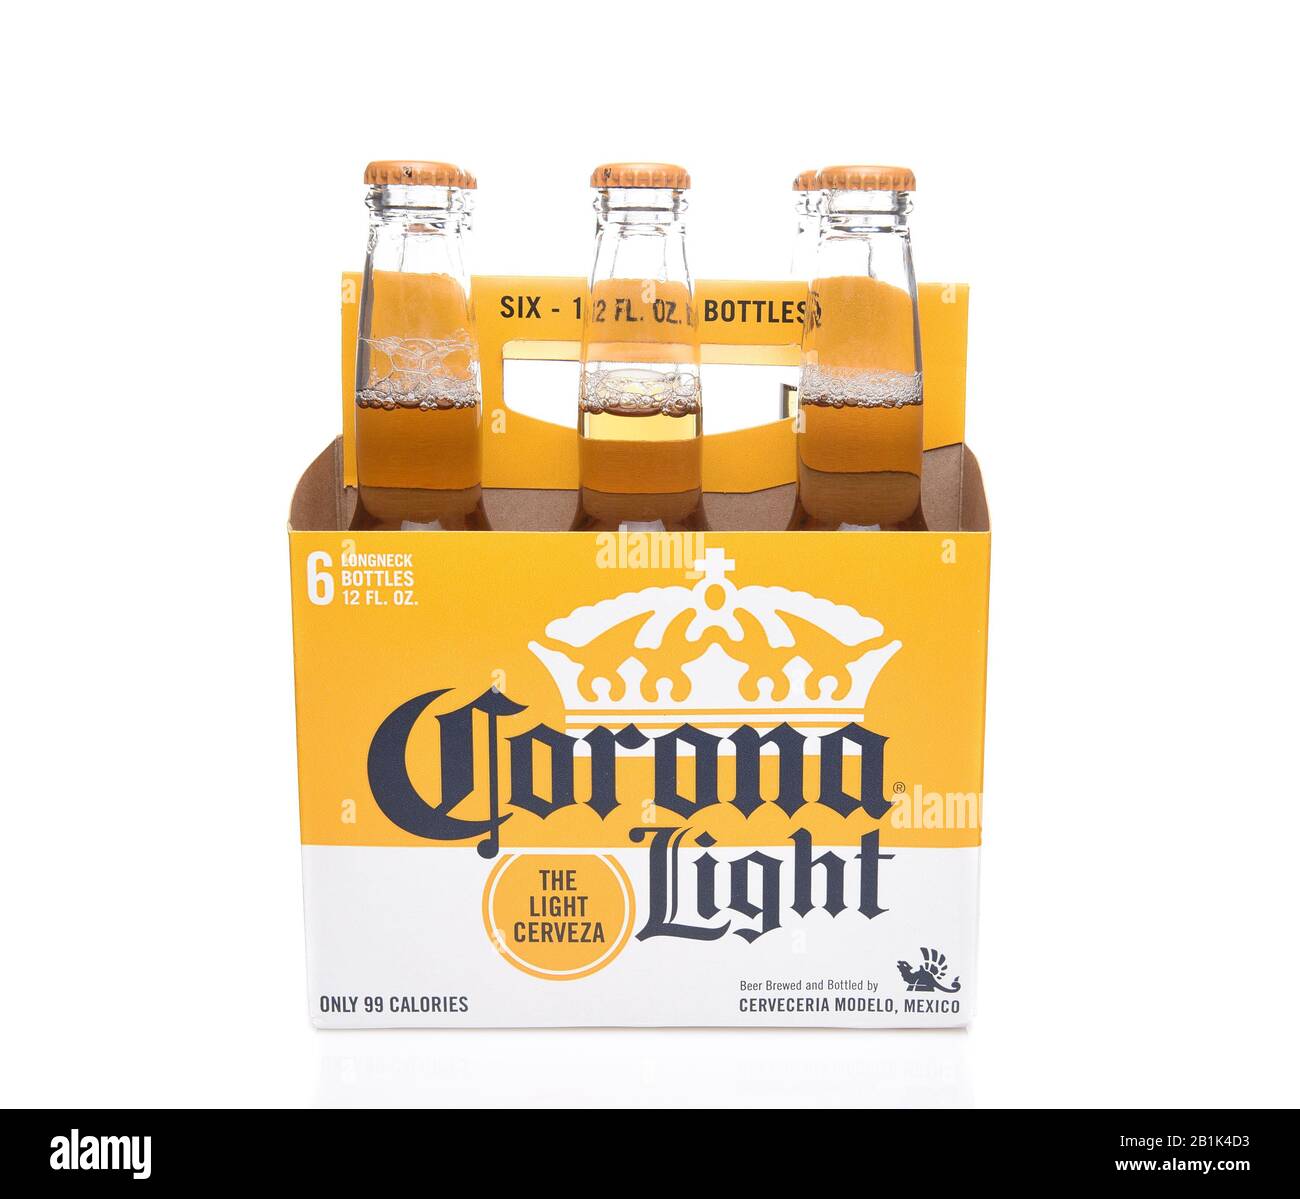 IRVINE, CALIFORNIA - DECEMBER 14, 2017: 6 pack  of Corona Light Beer Bottles. Corona is the most popular imported beer in the USA. Stock Photo